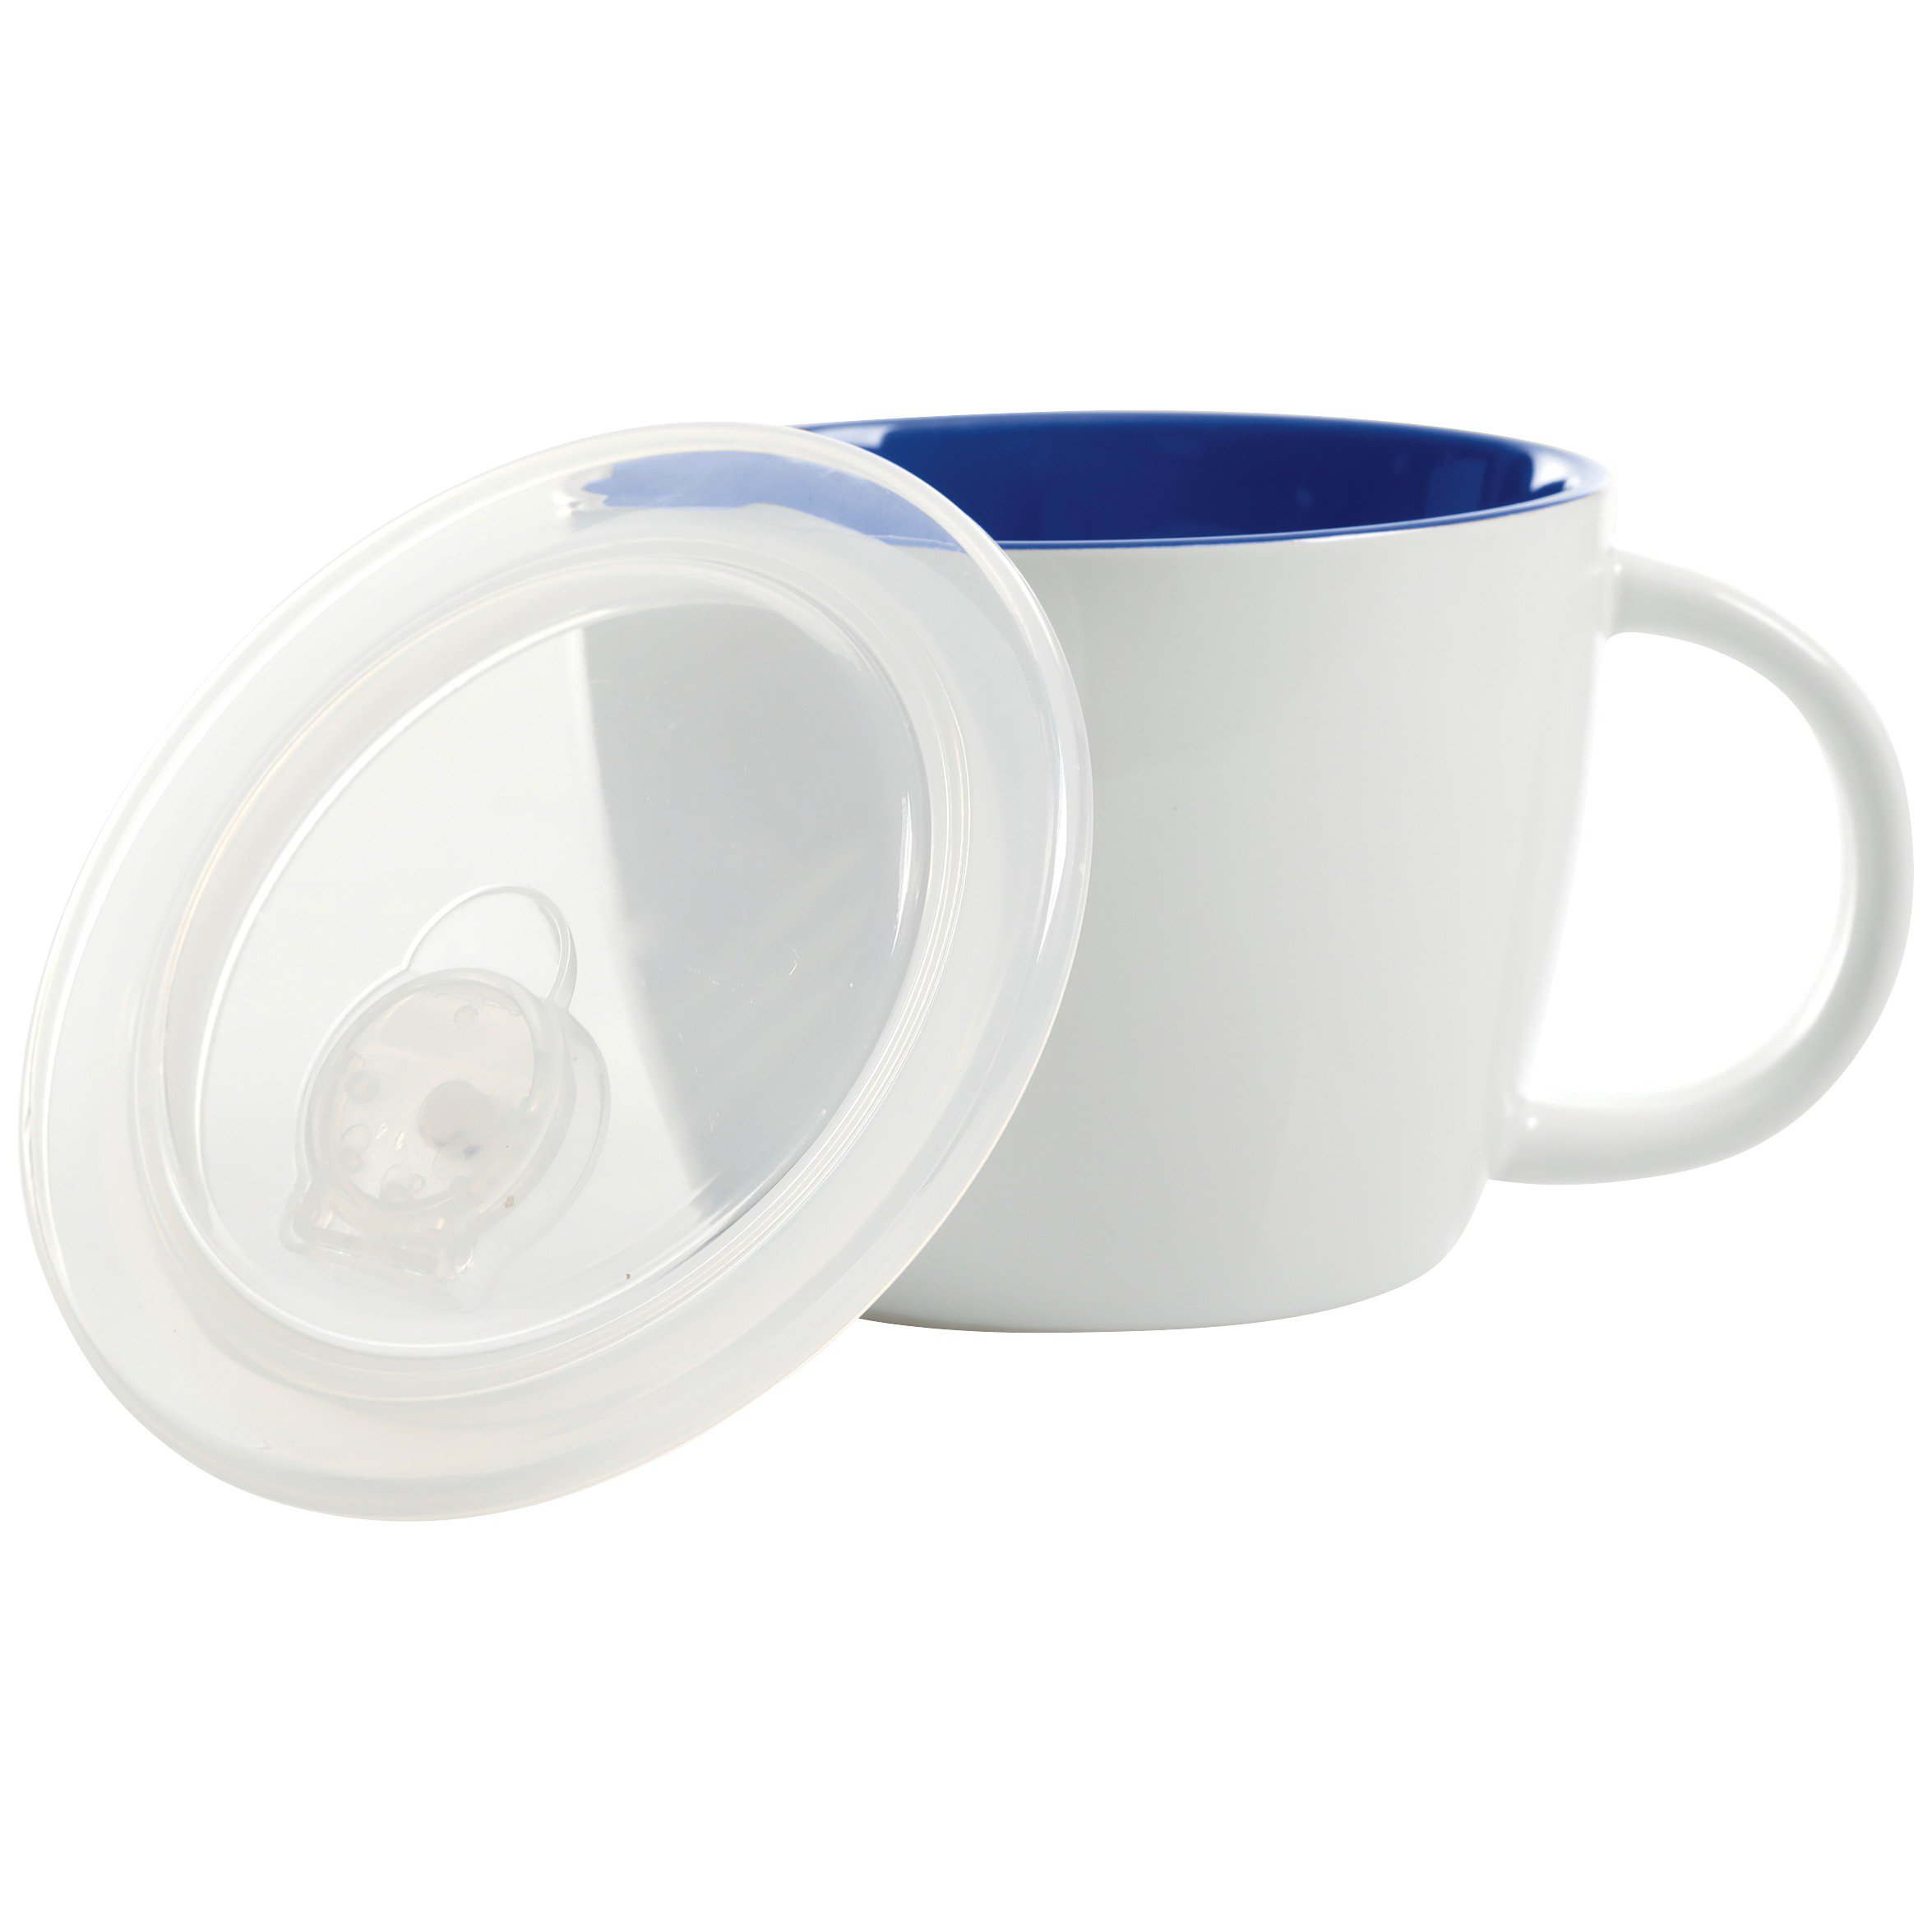 Weight Watchers Soup Cup with Vent Lid - Shop Utensils & Gadgets at H-E-B